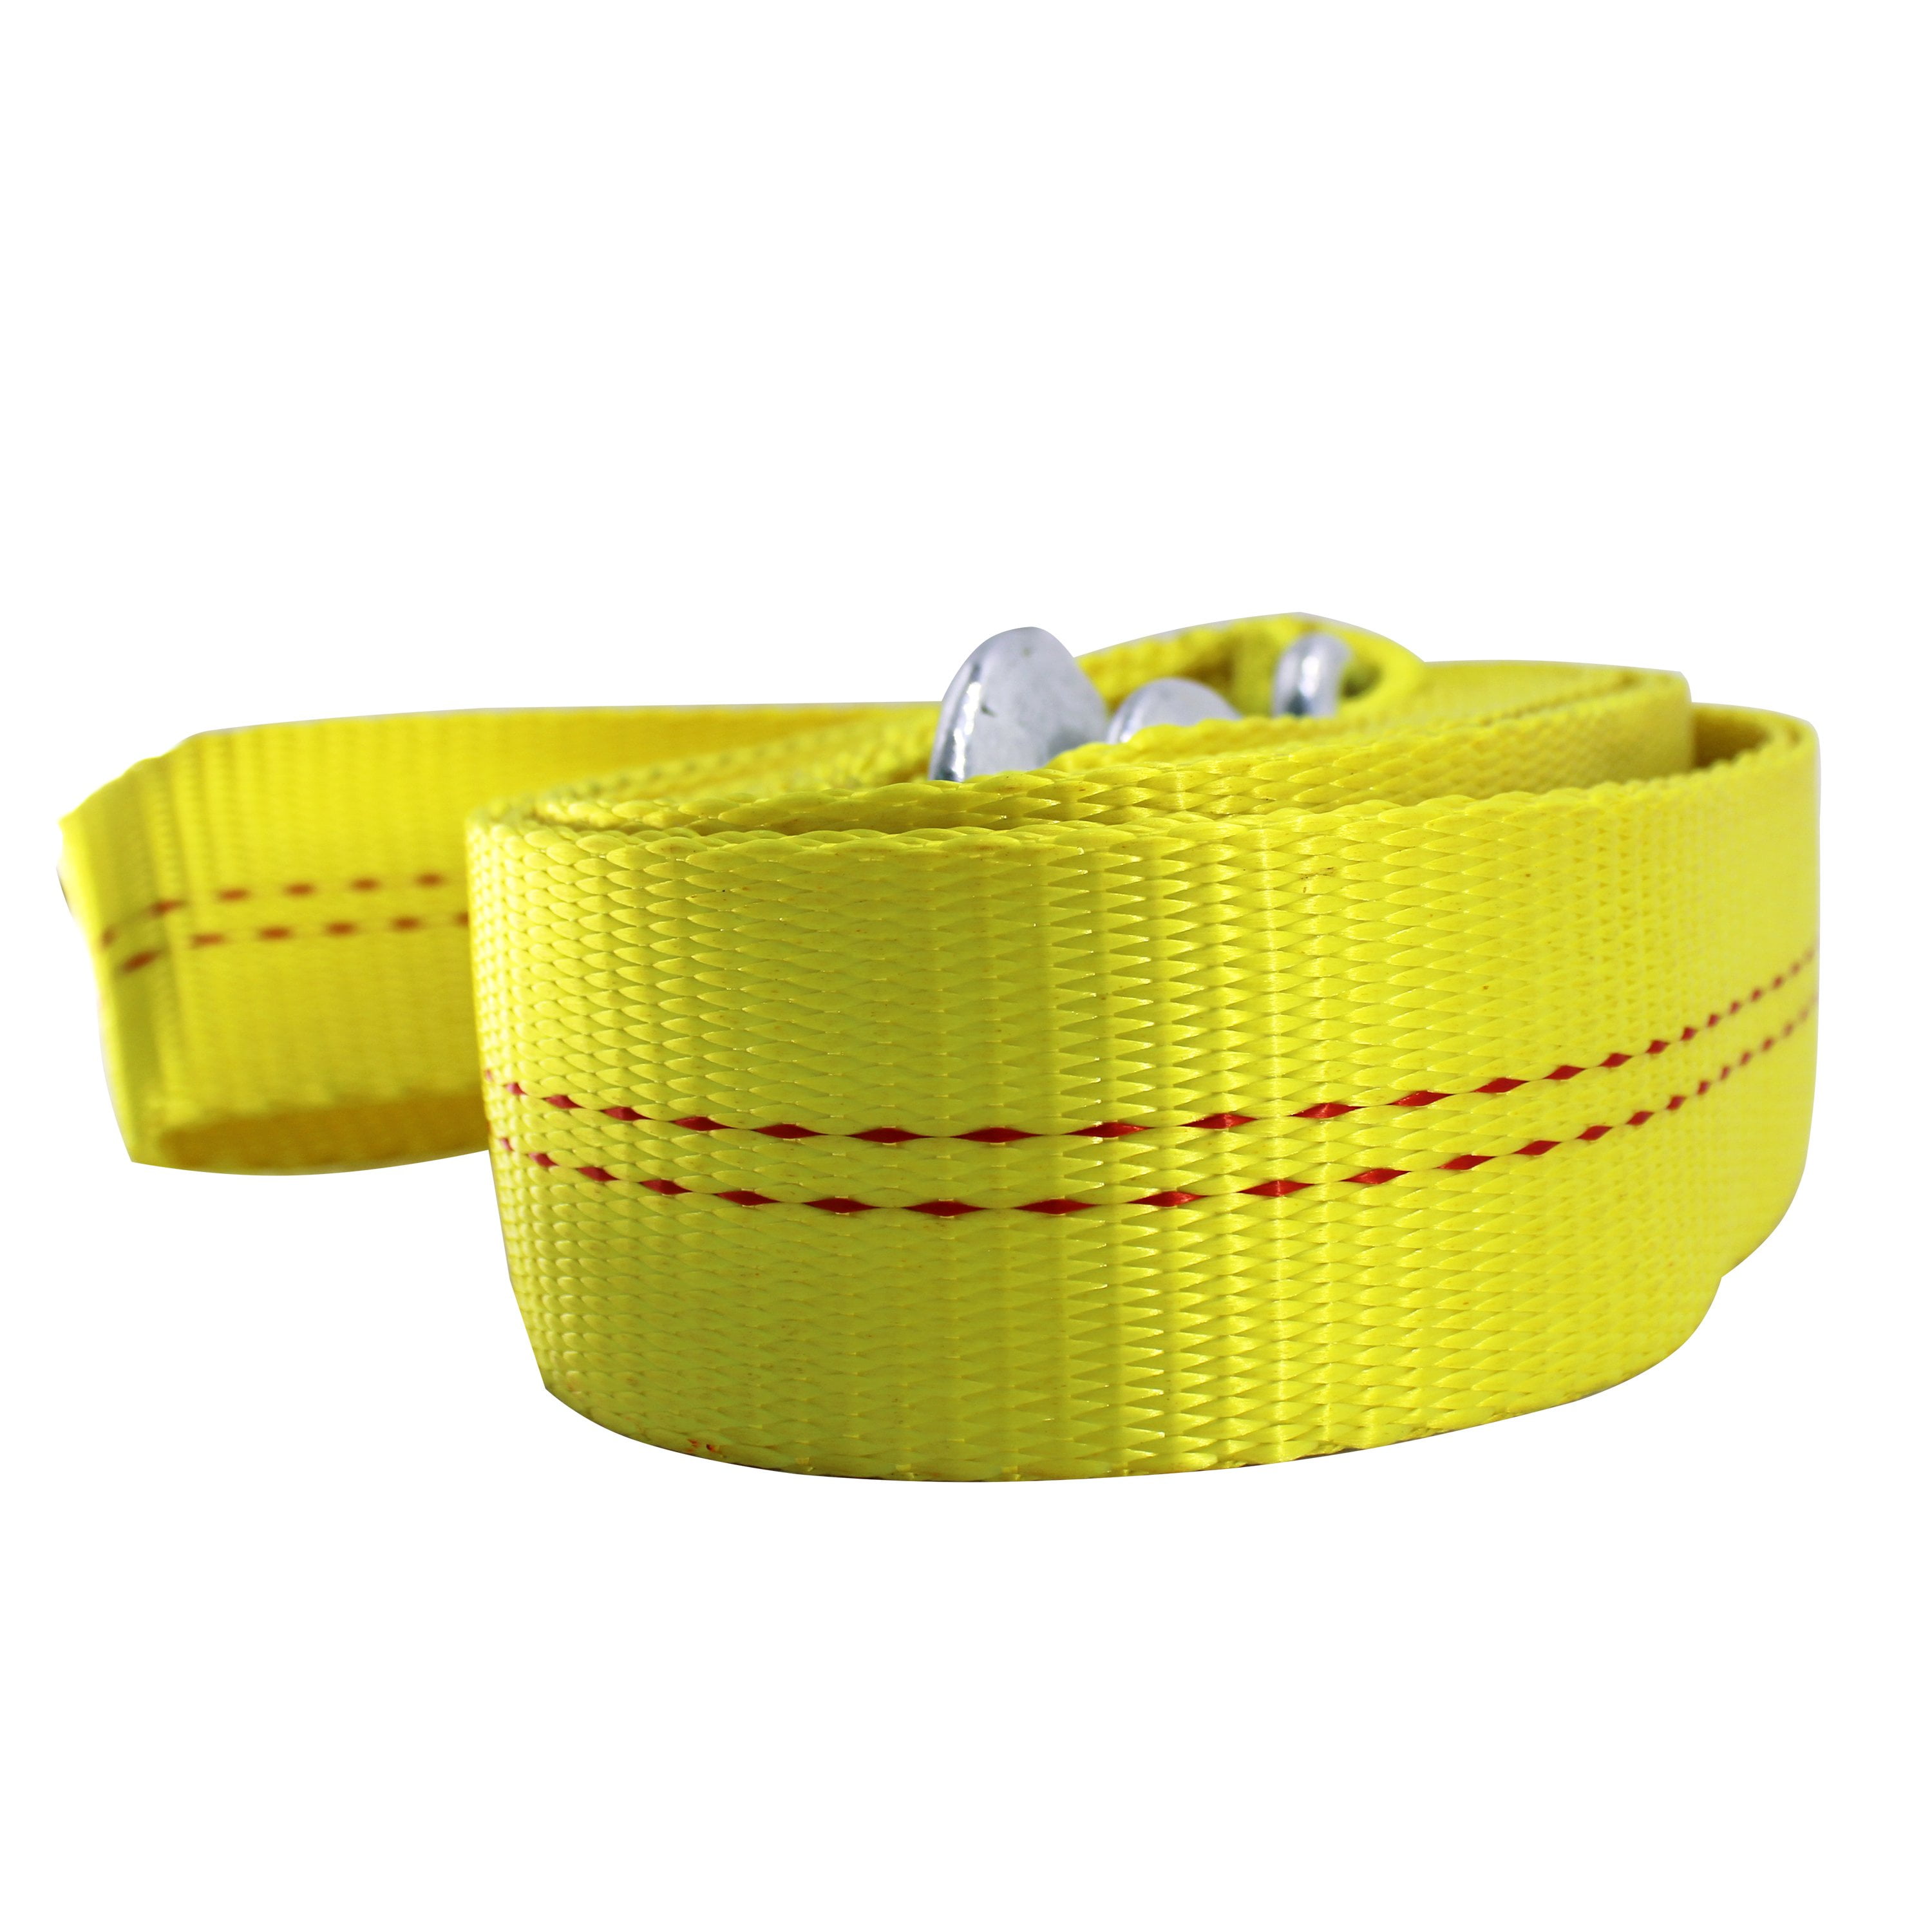  HFS(R) Heavy-Duty Tow Strap with Hooks